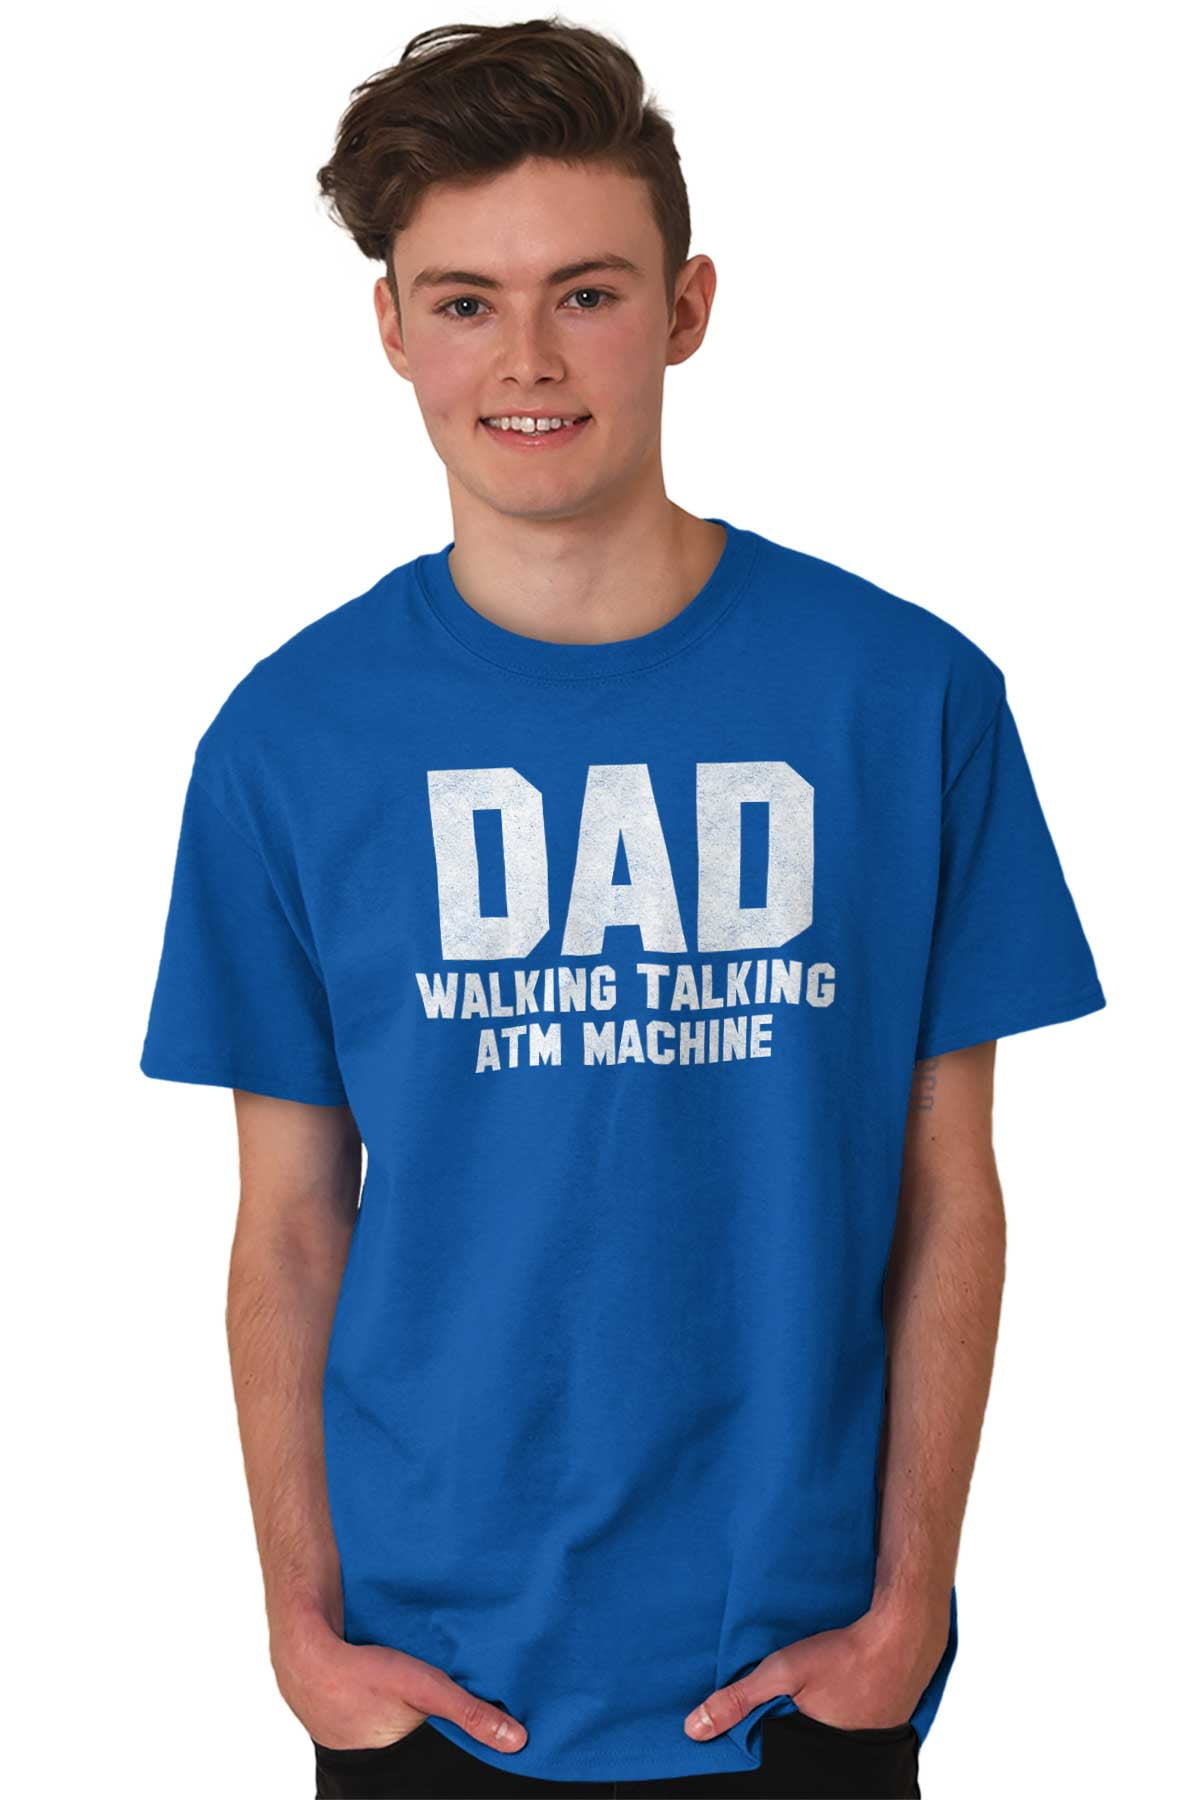 machine to make t shirts for sale